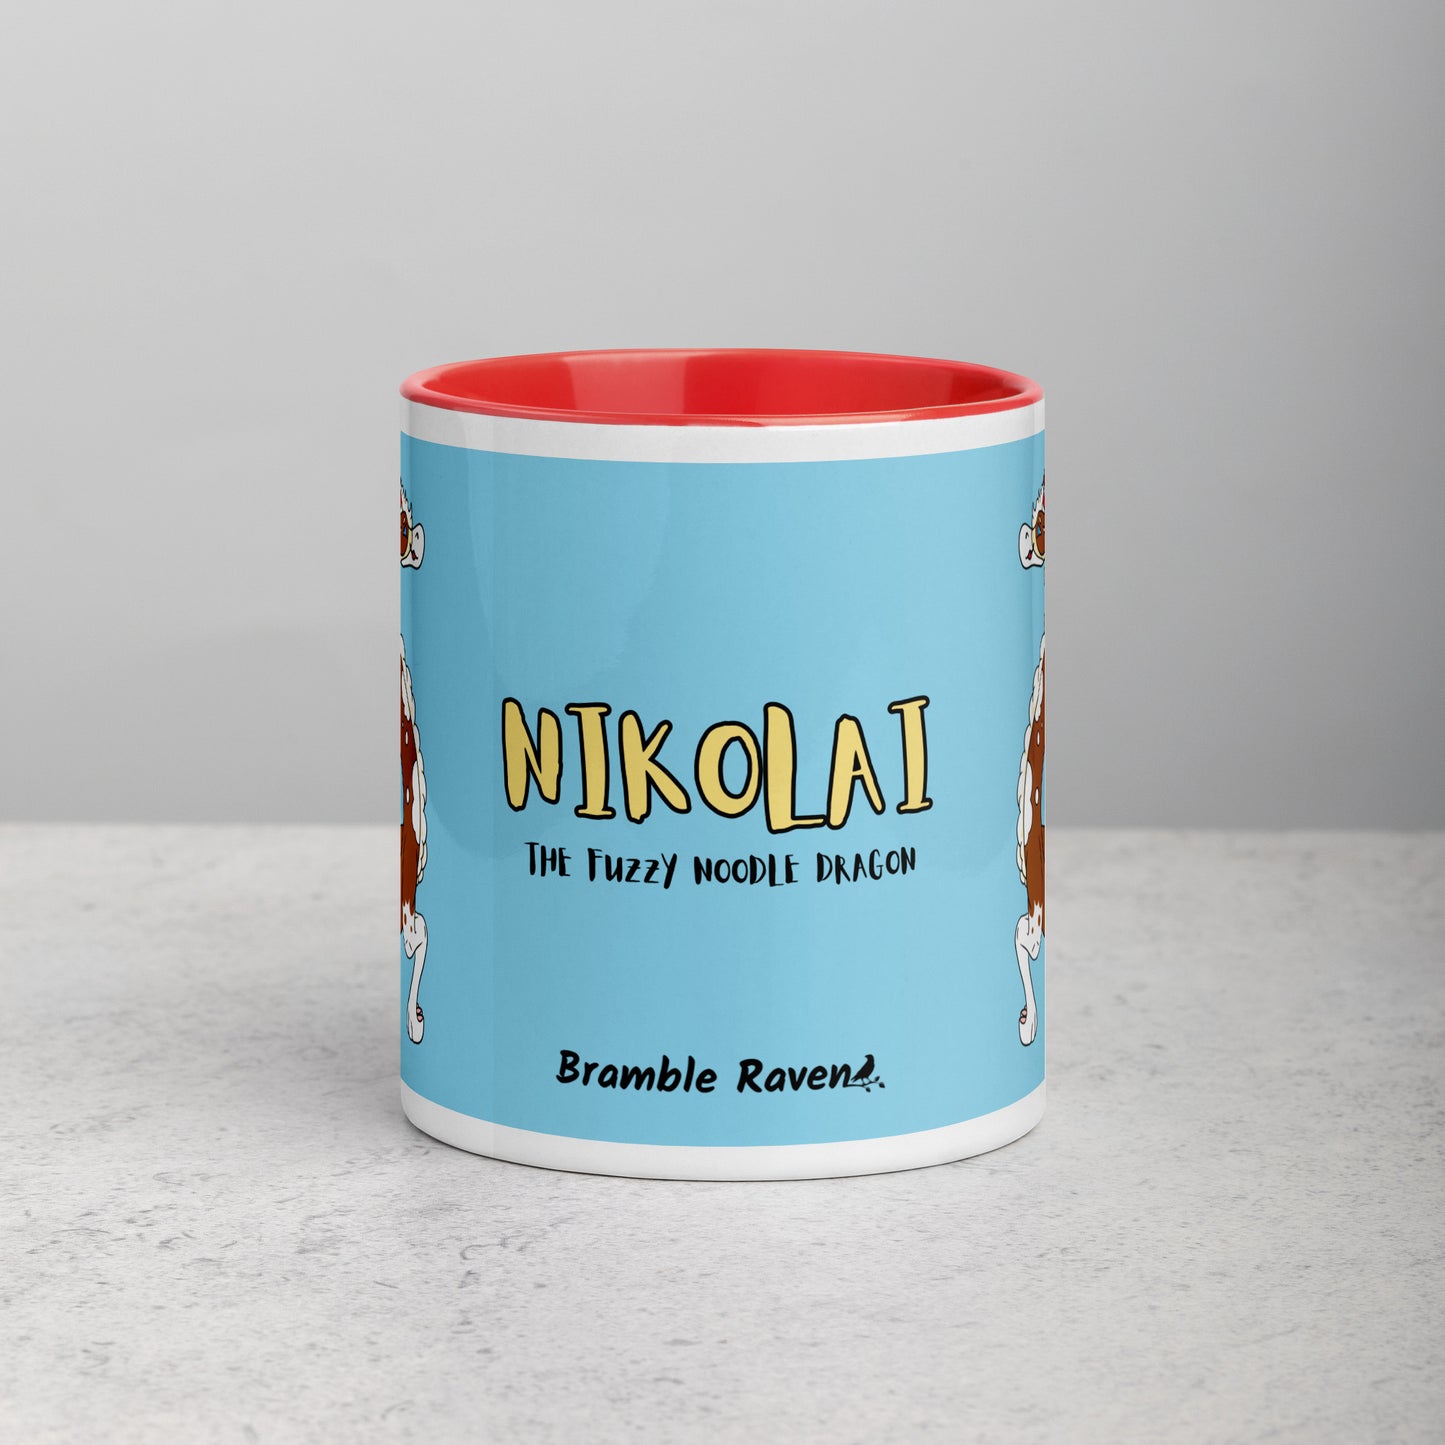 11 ounce ceramic mug with red handle, rim and inside color. Features double-sided image of Nikolai the Fuzzy Noodle Root beer float dragon on a light blue background. Mug is microwave and dishwasher safe. Front view shows Nikolai the Fuzzy Noodle Dragon text and Bramble Raven logo.